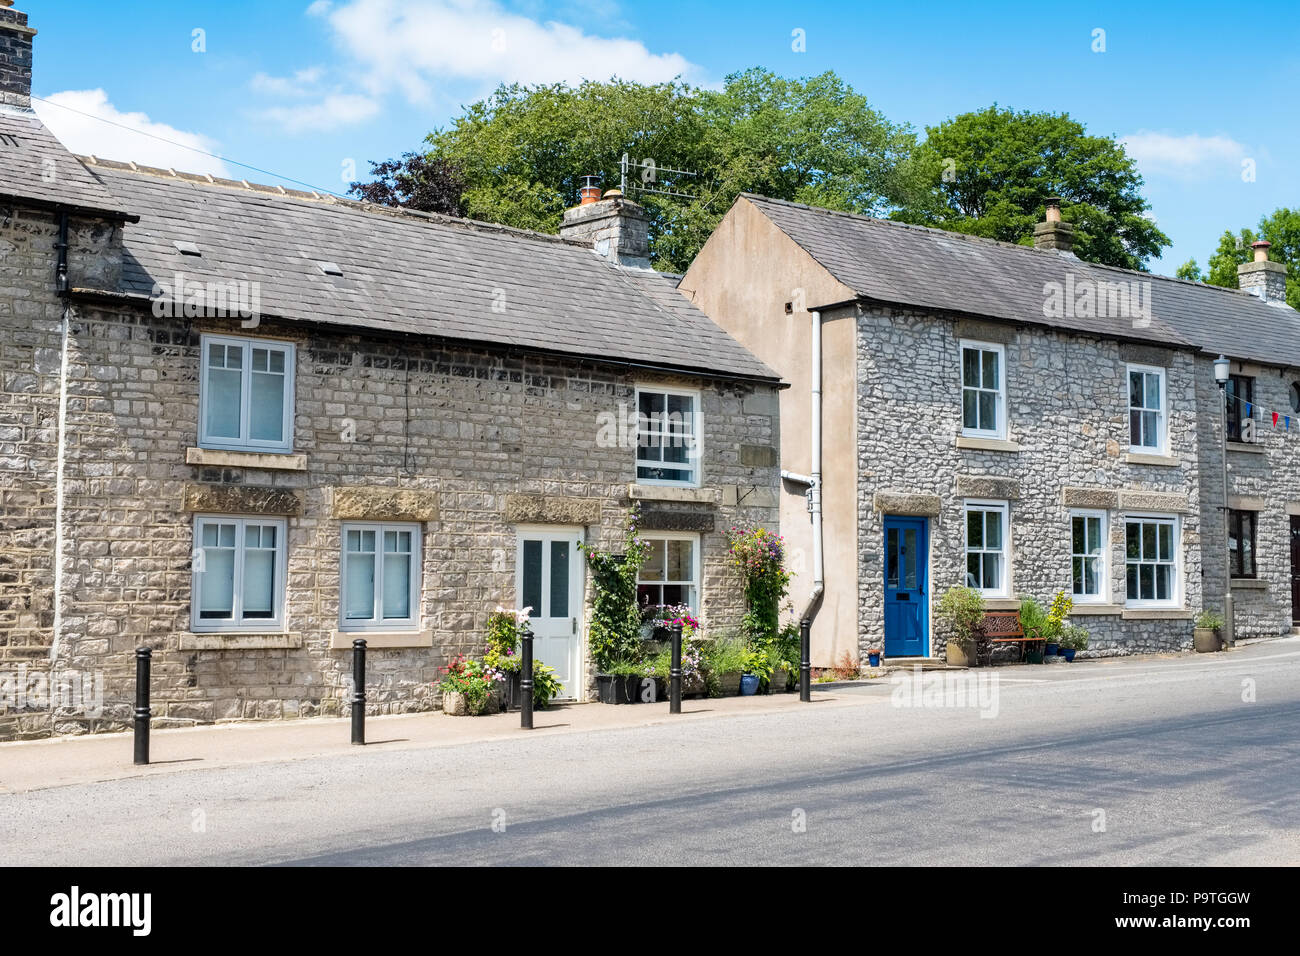 The Peak District village of Tideswell in Derbyshire, UK Stock Photo